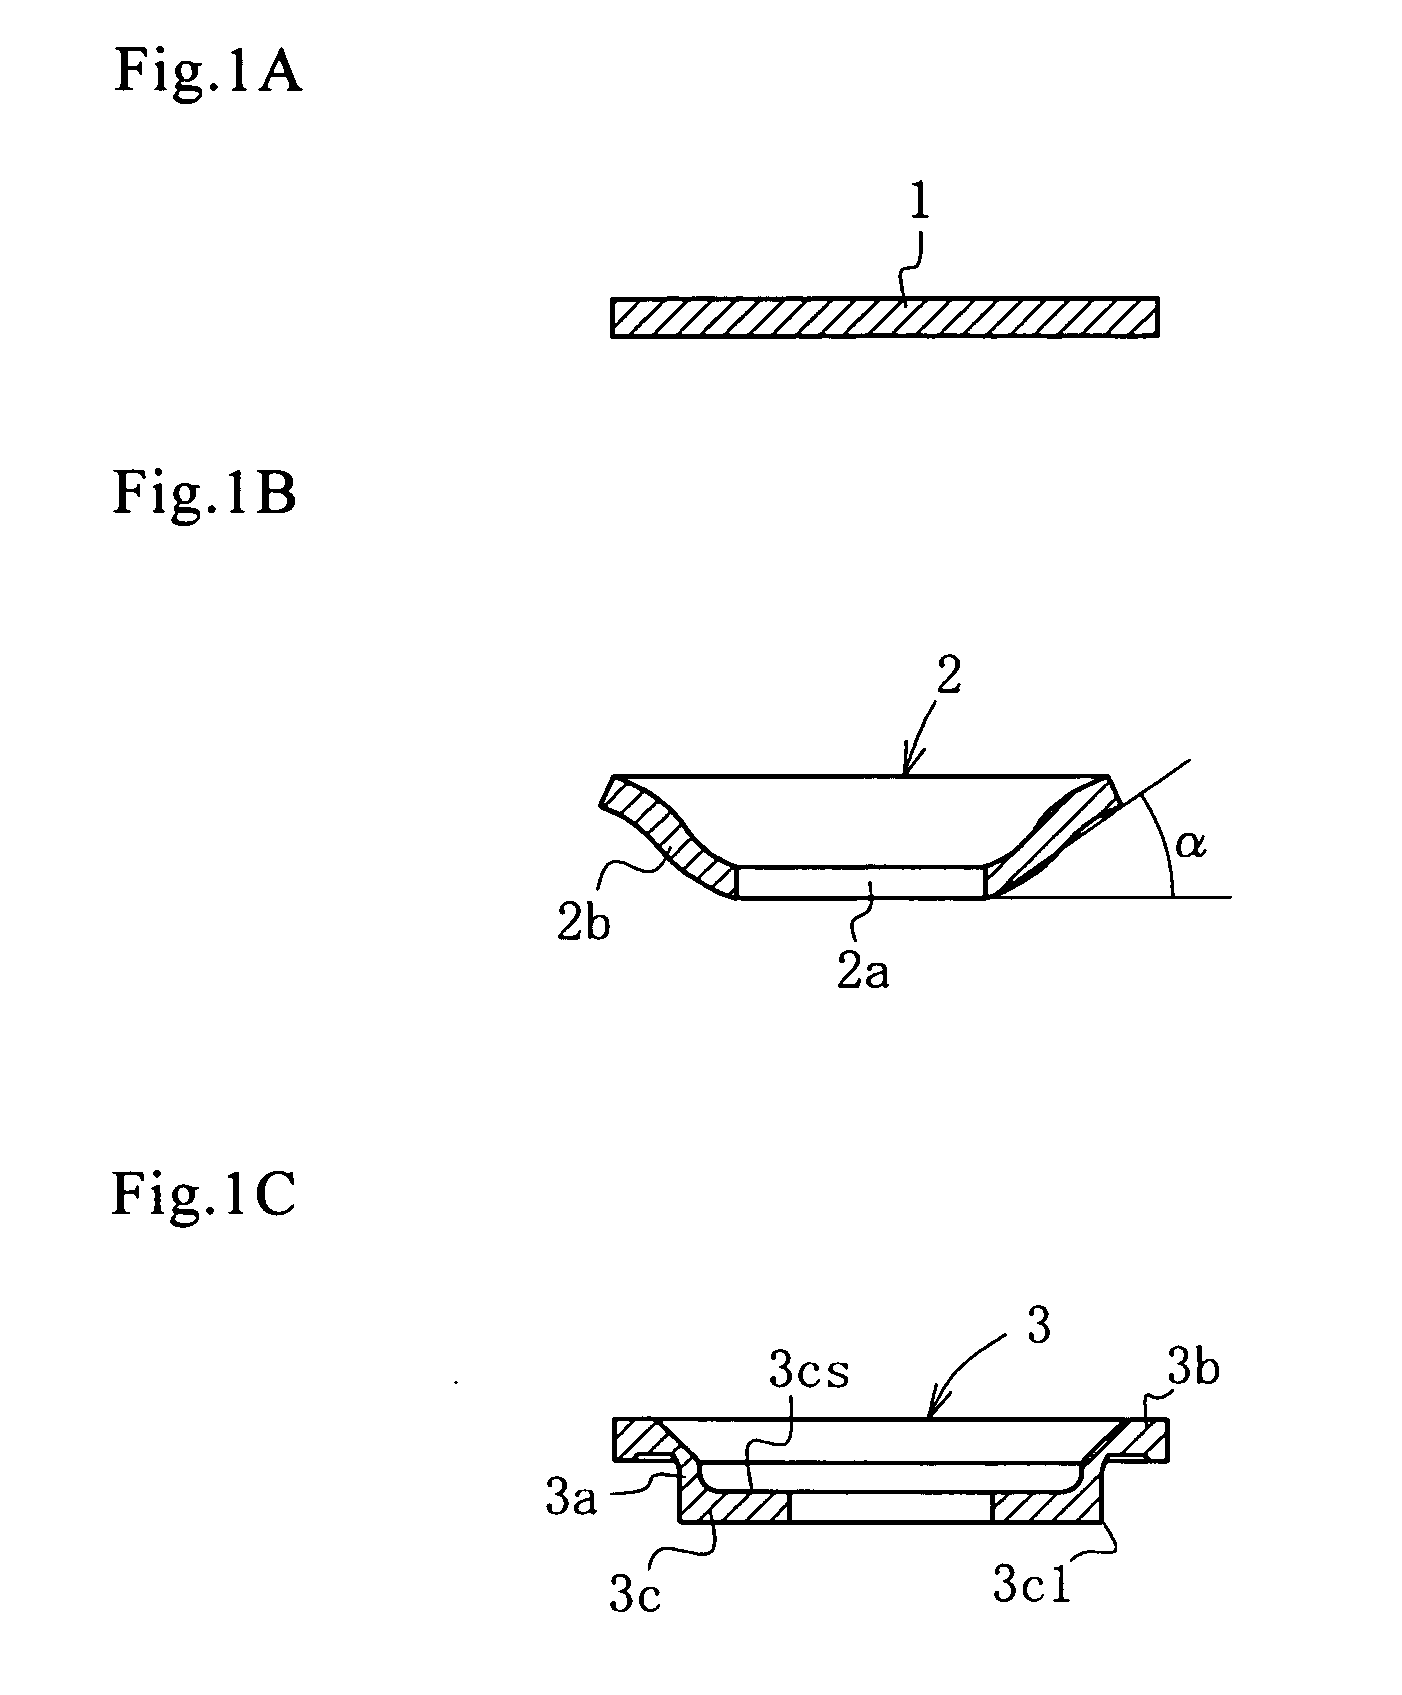 Method of forming spring washer blind-holes into a piston for an automobile transmission